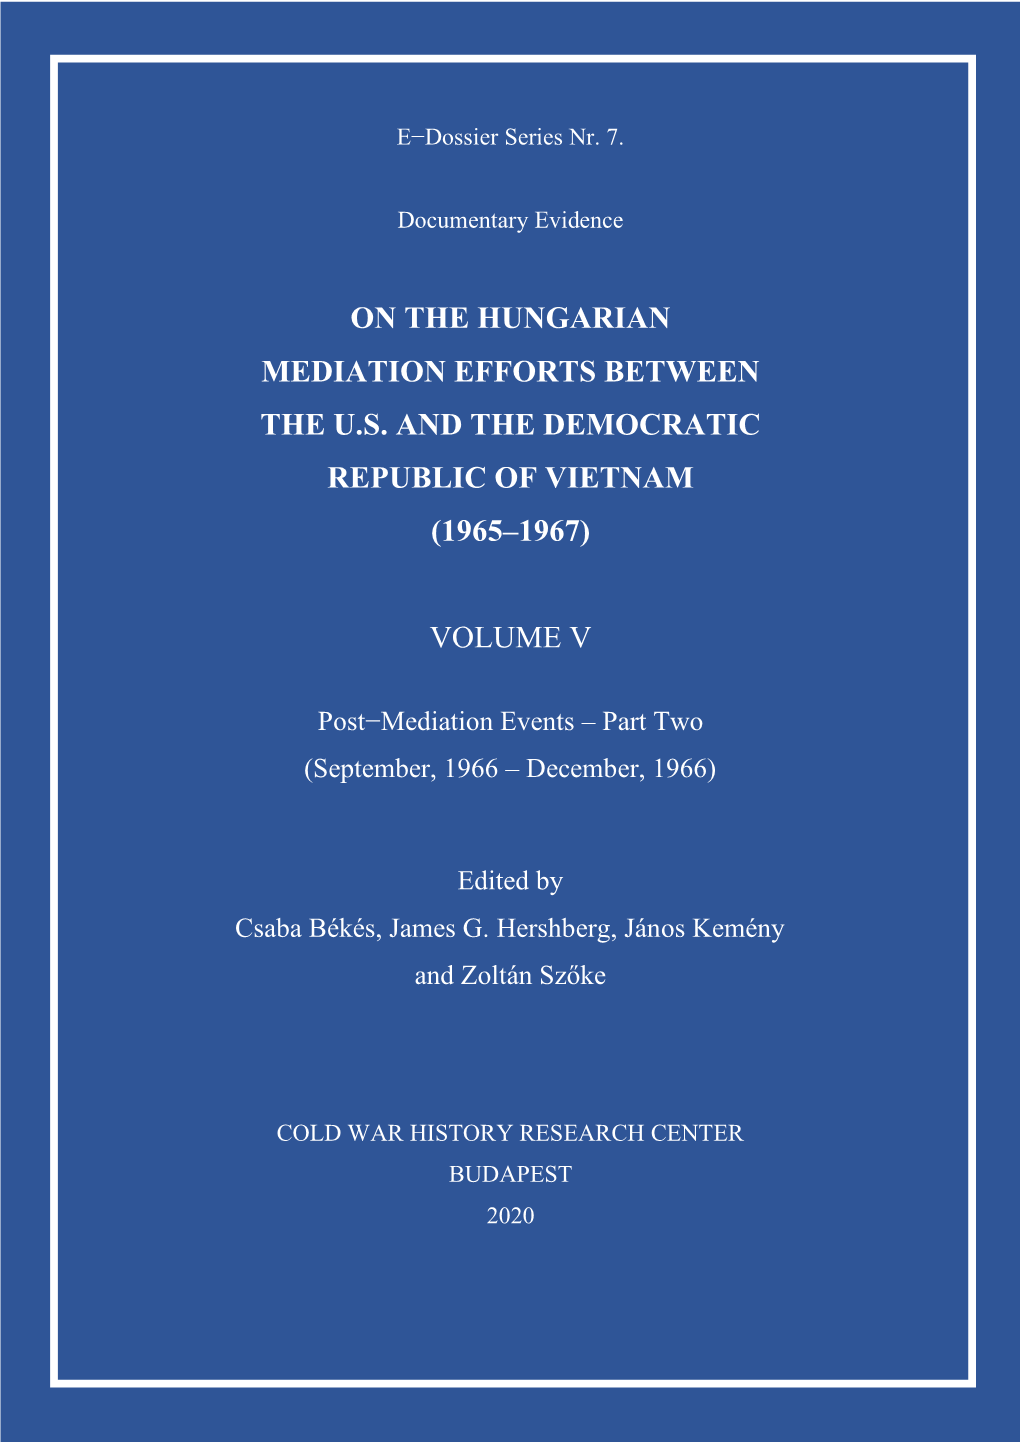 On the Hungarian Mediation Efforts Between the U.S. and the Democratic Republic of Vietnam (1965–1967)